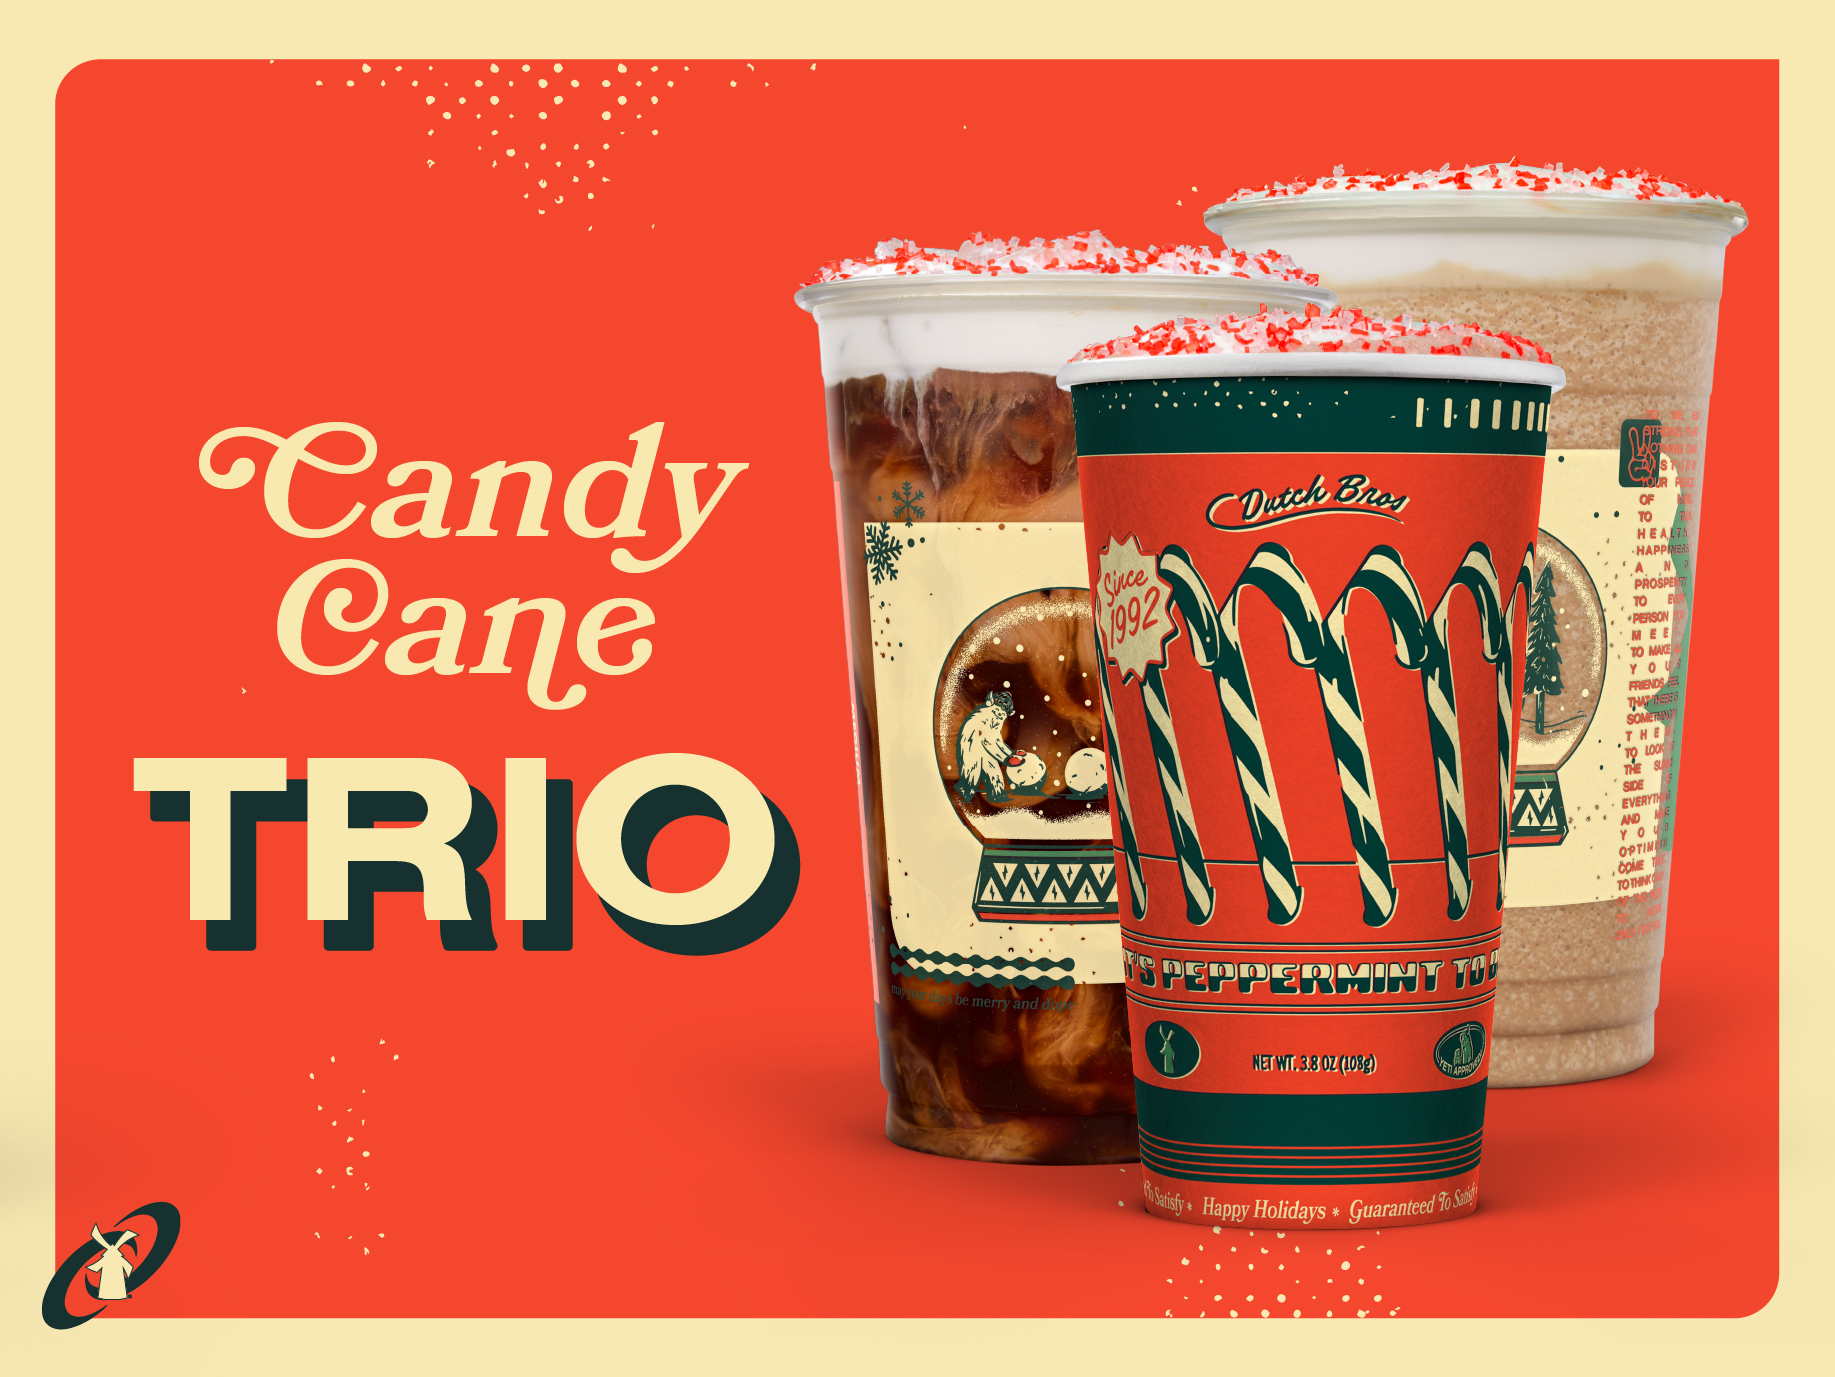 Candy Cane Trio: The Candy Cane Trio features Cold Brew, Freeze or Cocoa! A delicious mix of peppermint flavor and Dutch Bros’ signature chocolate milk, topped with Soft Top and peppermint sprinks.